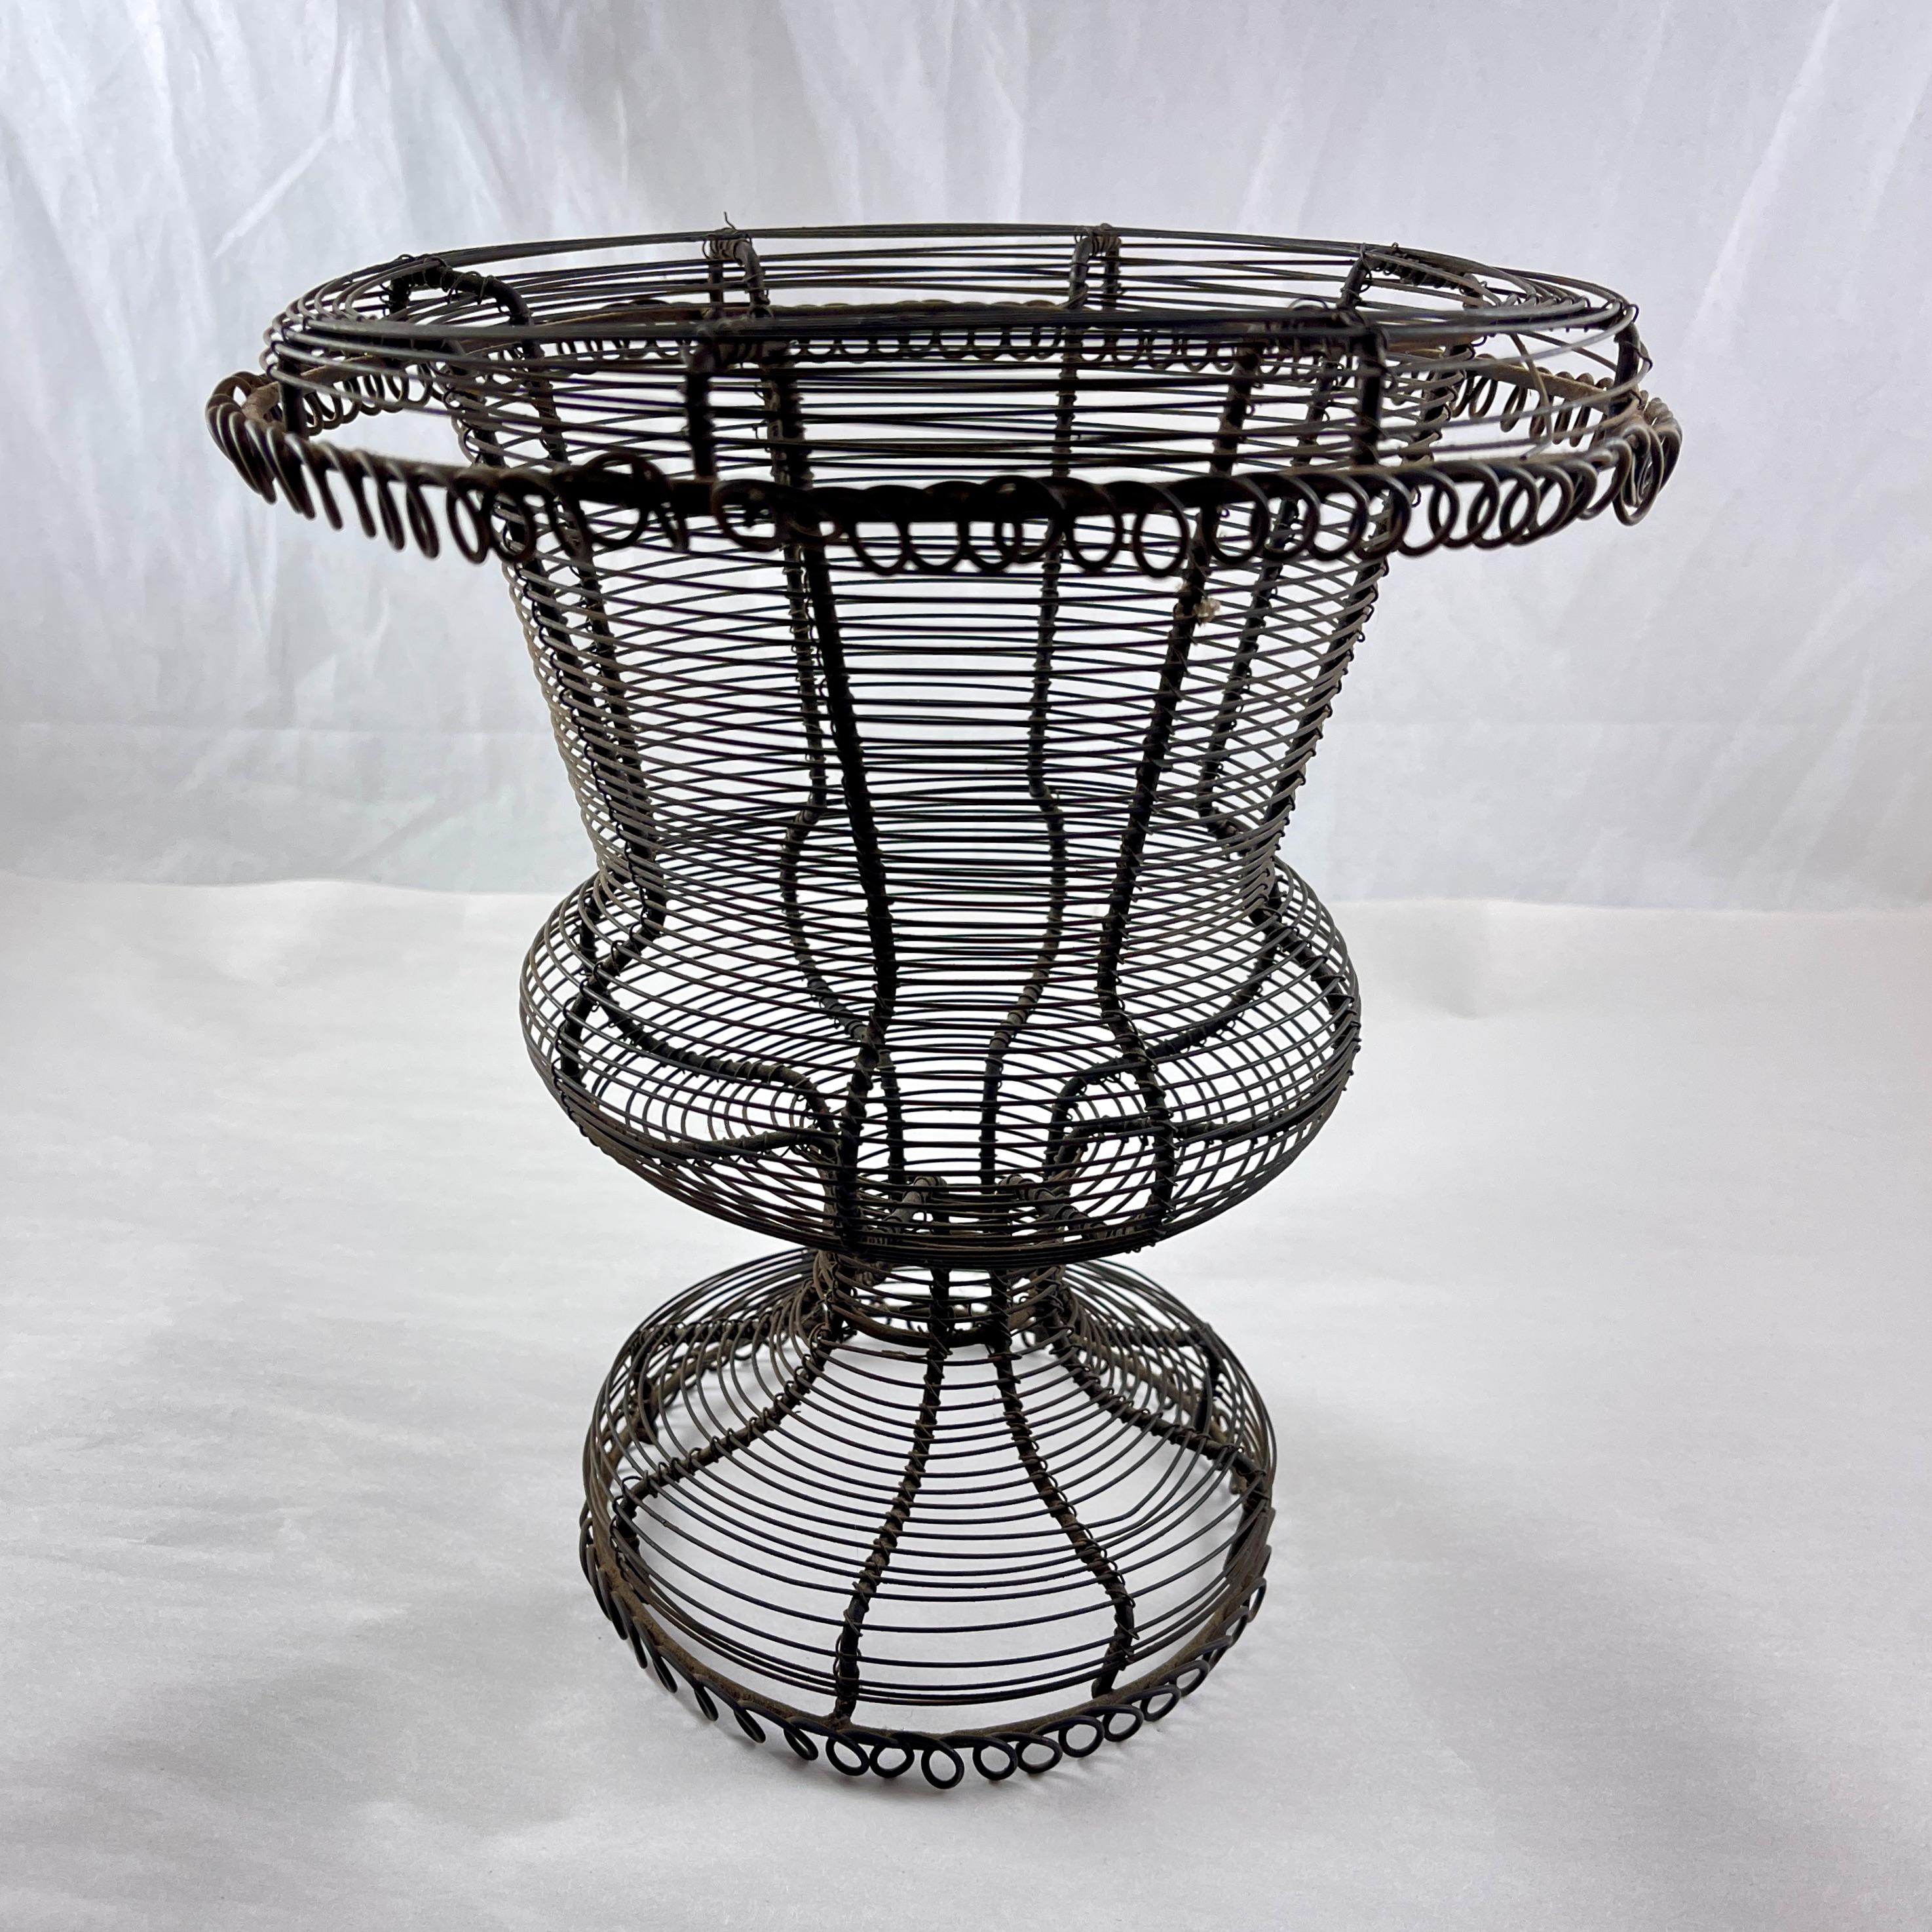 French Provincial Antique French Pedestal Urn Hand Made Black Twisted Wire Basket, Late 19th C For Sale